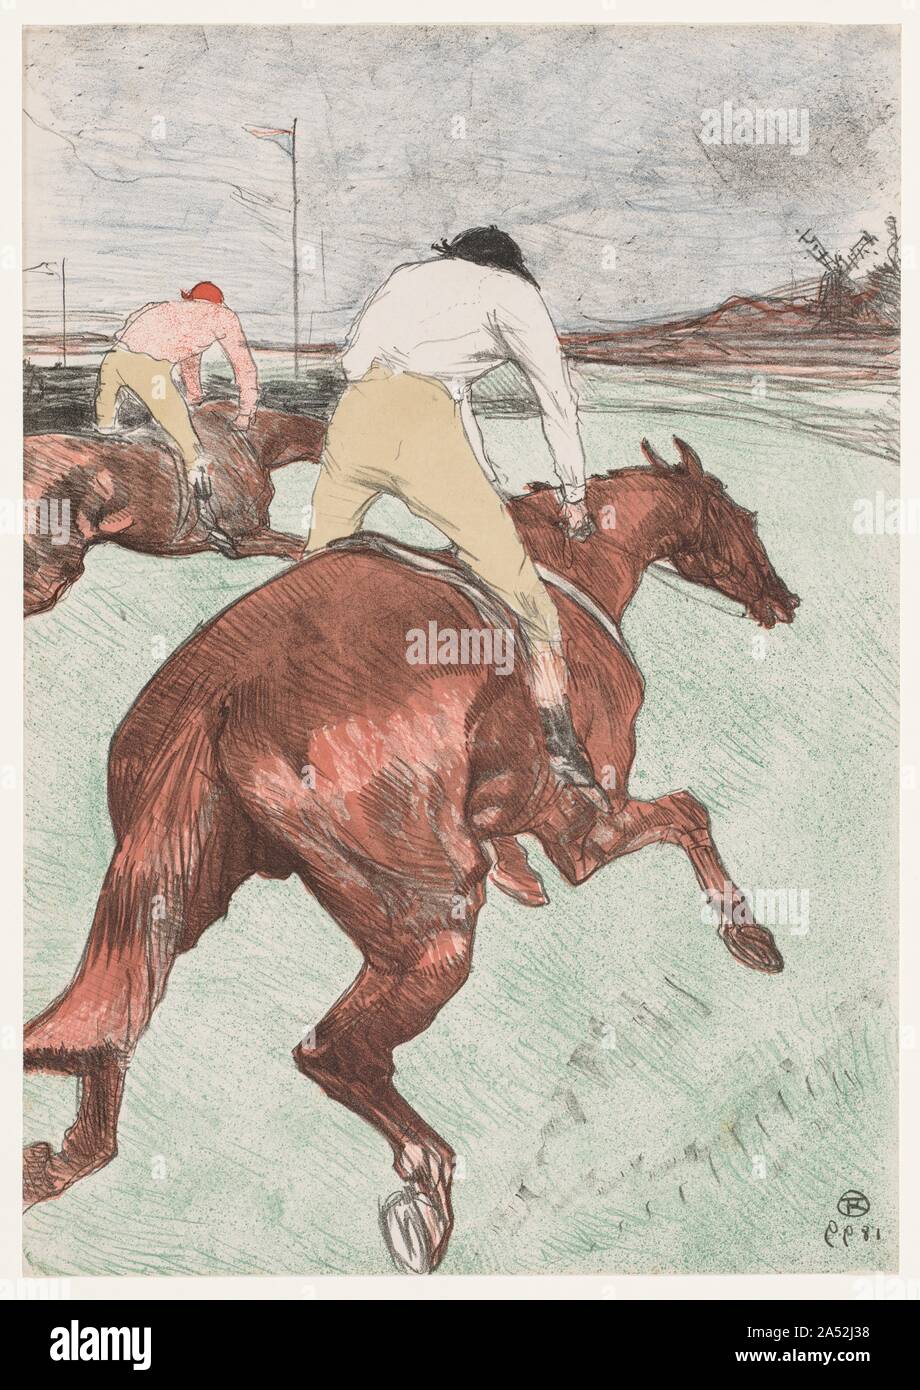 The Jockey, 1899. Motivated by the popularity of the races, Henri de Toulouse-Lautrec executed this lithograph both in colour, seen here, and in black and white. He intended to publish the colour version in a portfolio of horse-racing subjects, but the project never came to fruition and  Jockey  was published alone. The artist's admiration for Edgar Degas's horse-racing pictures is clear in  Jockey , and he shared Degas's appreciation of Japanese ukiyo-e woodblock prints. Particular elements of the lithograph reveal the influence of the Japanese woodcut: the overall flatness; the daring croppi Stock Photo